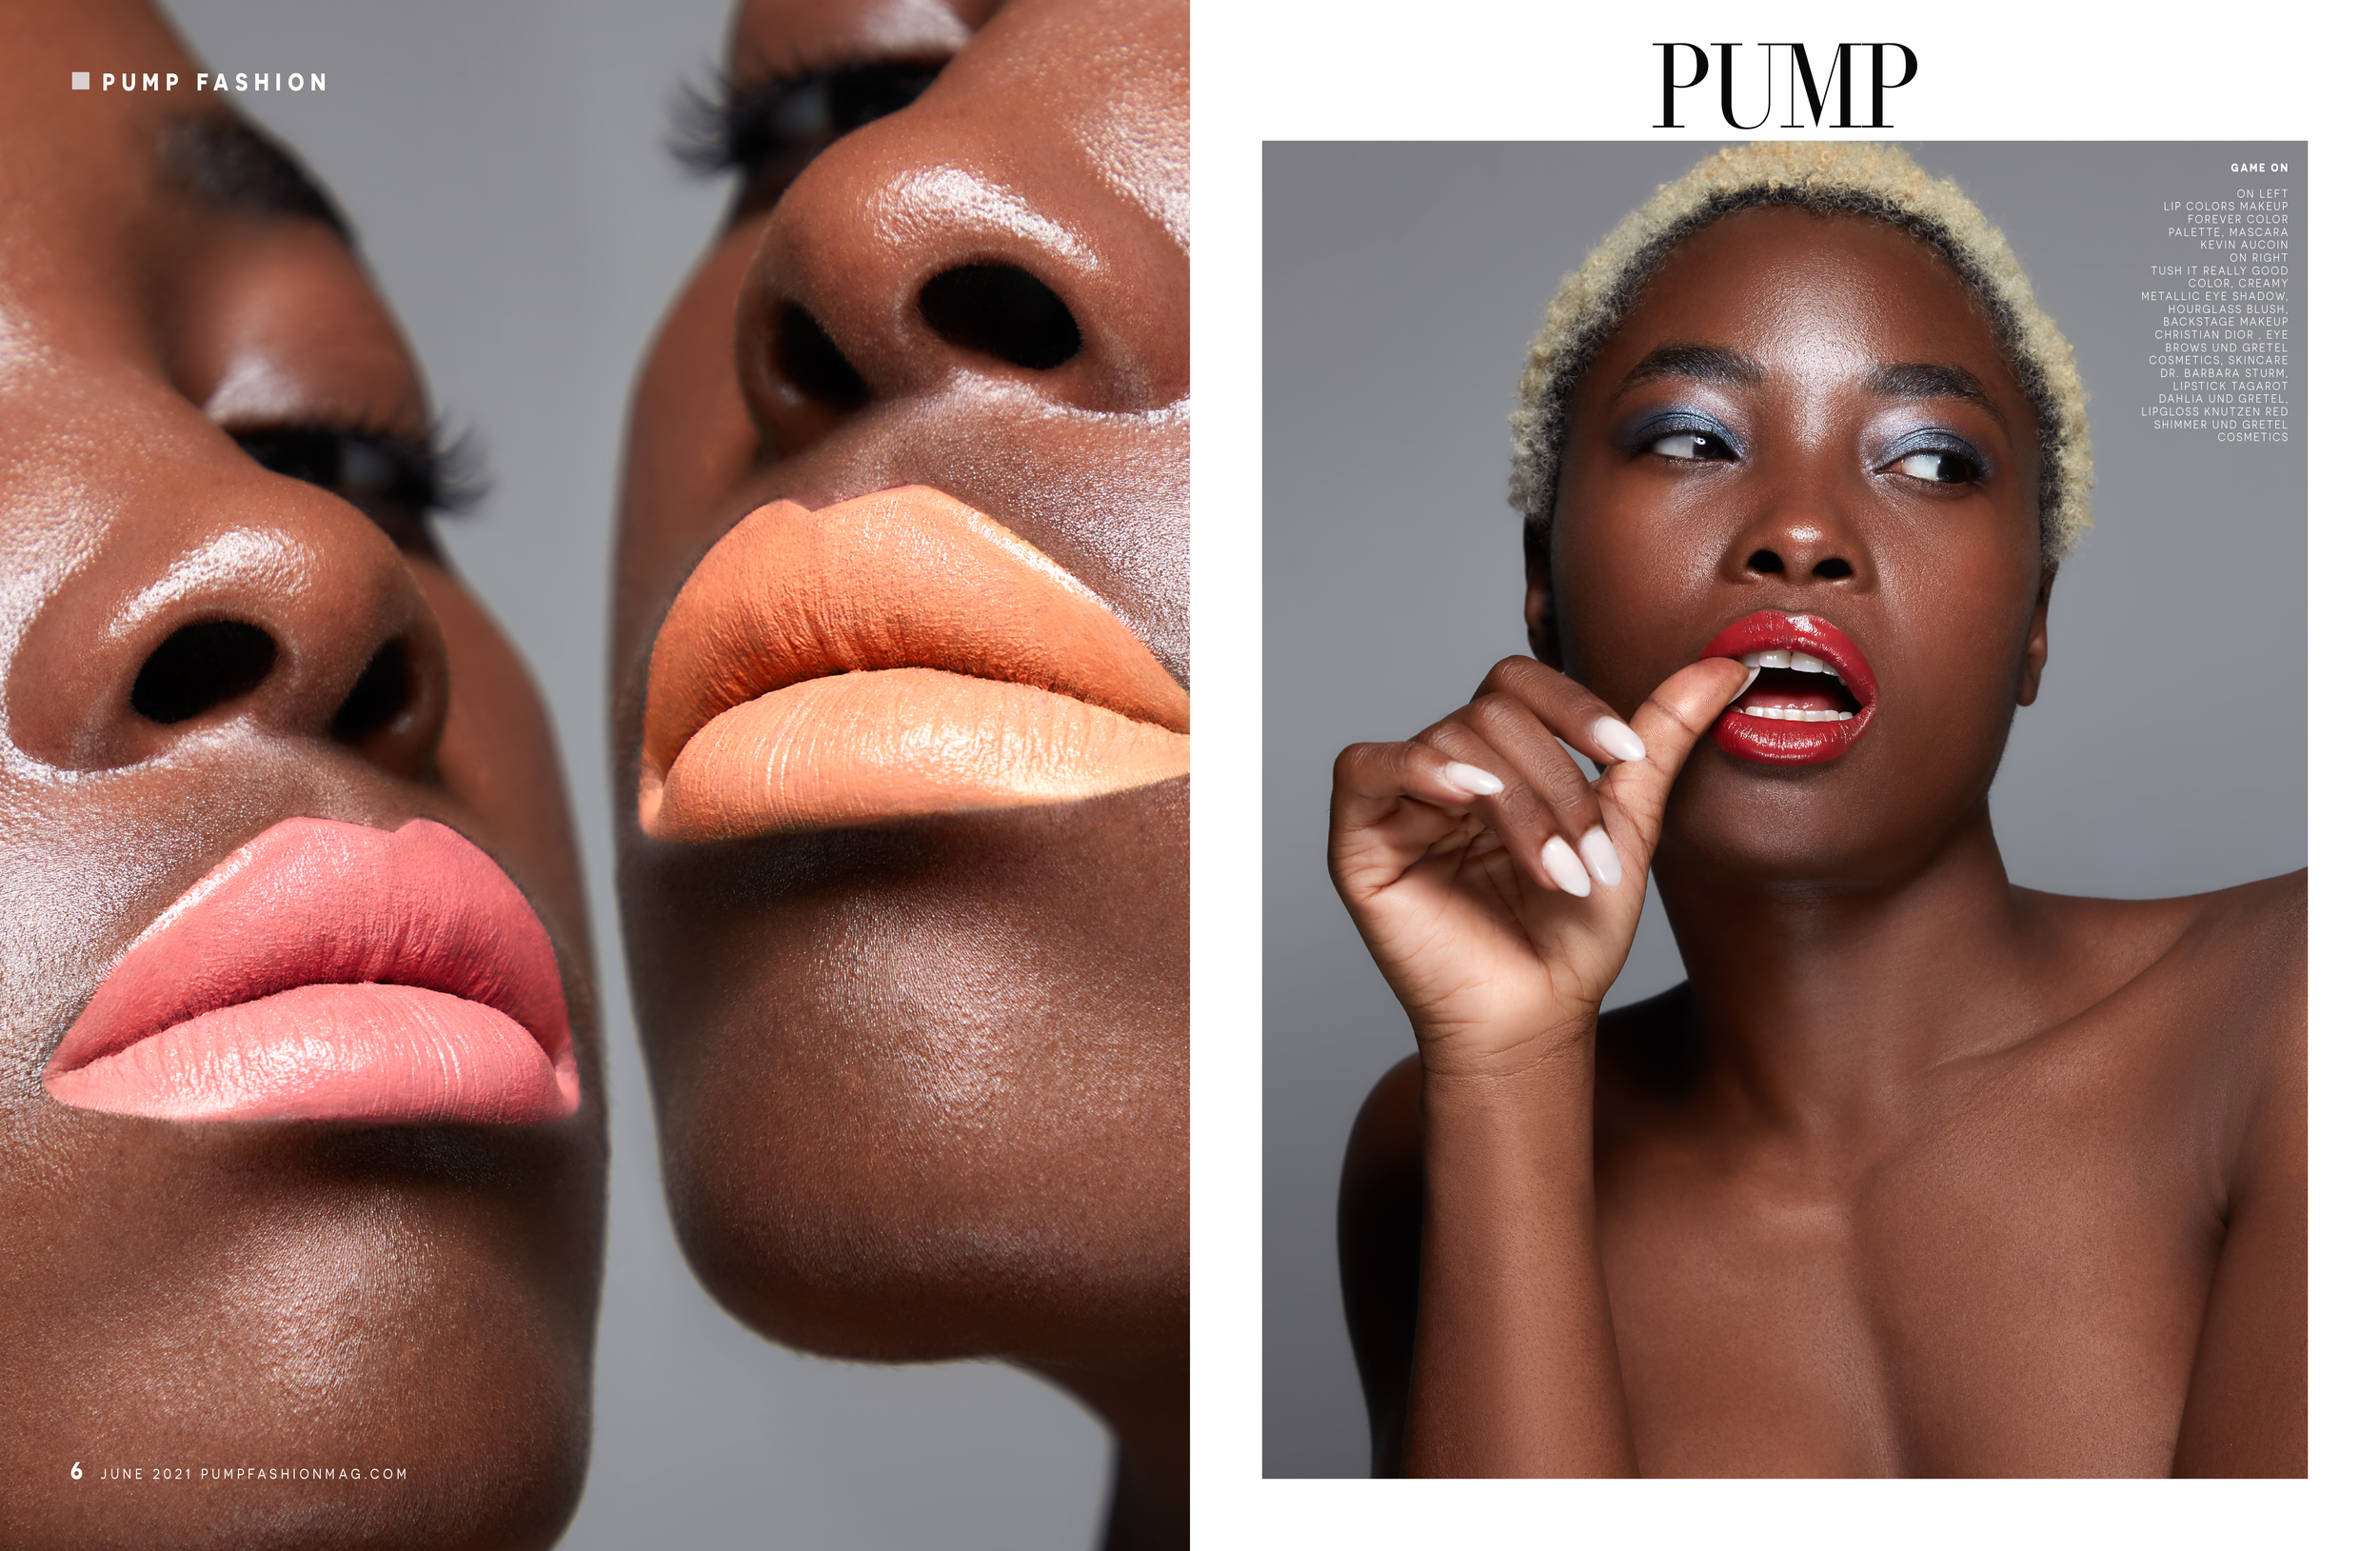 PUMP Magazine The Ultimate Fashion Edition Vol.5 June 20212.png